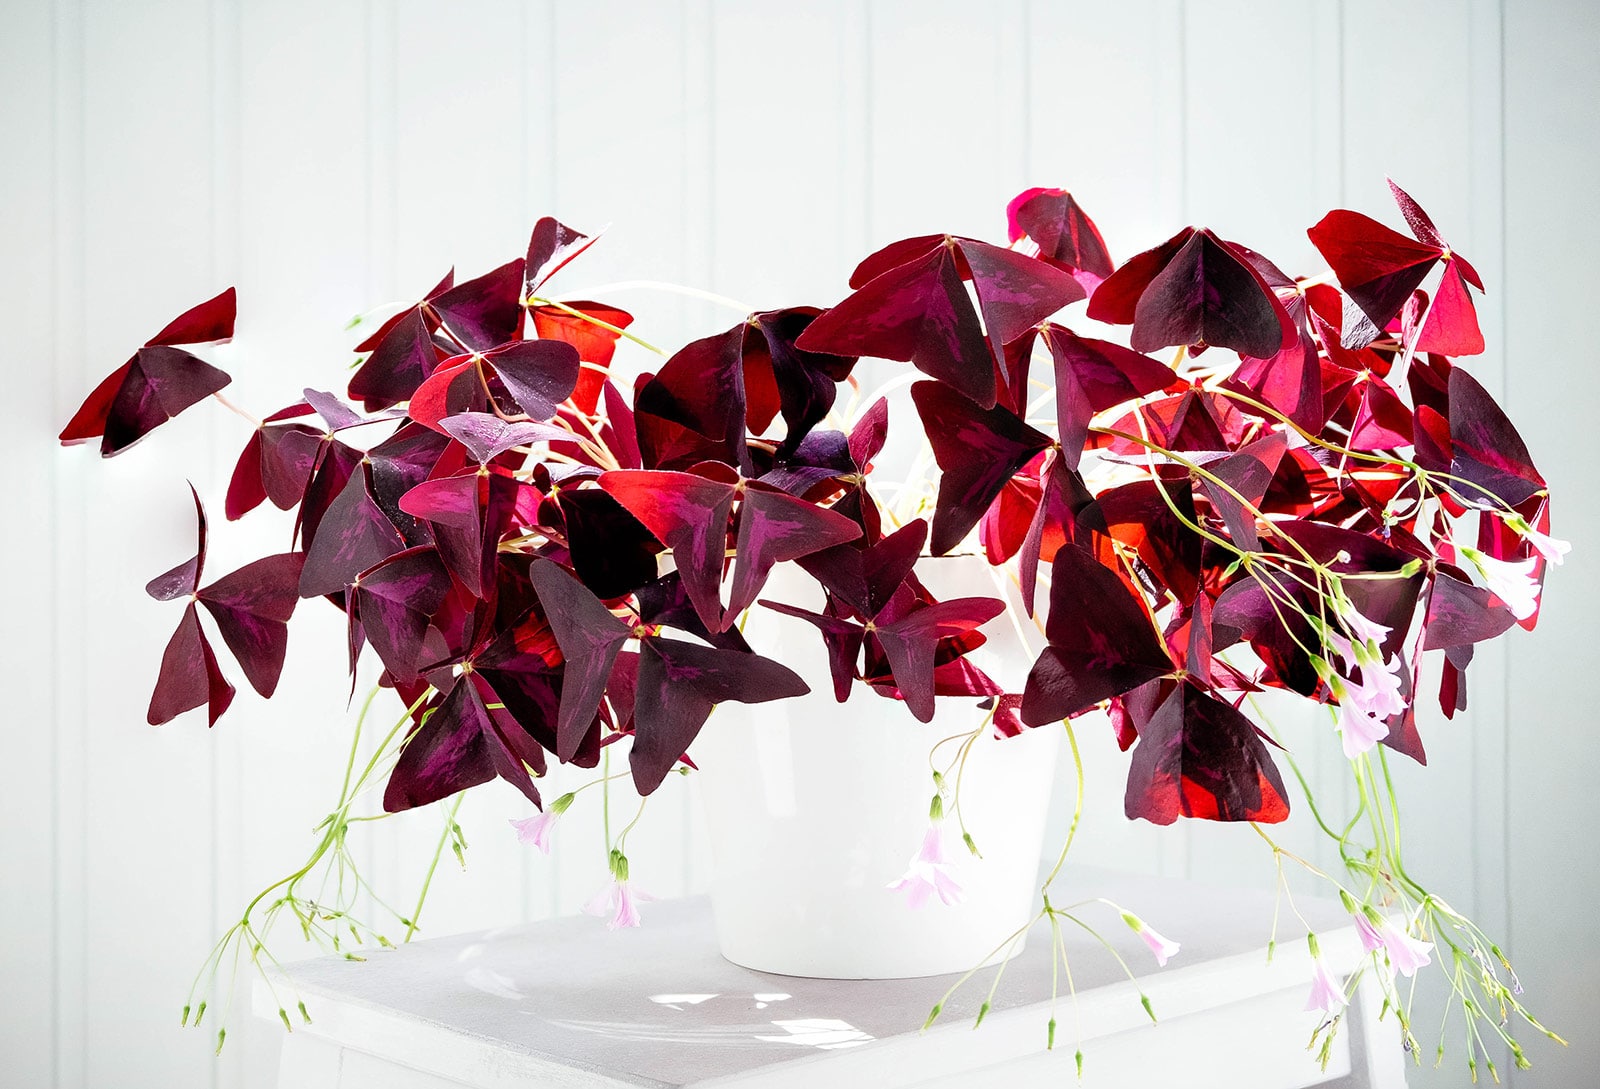 Reddish-purple Oxalis triangularis houseplant in a white pot against a white wall dappled with sunlight